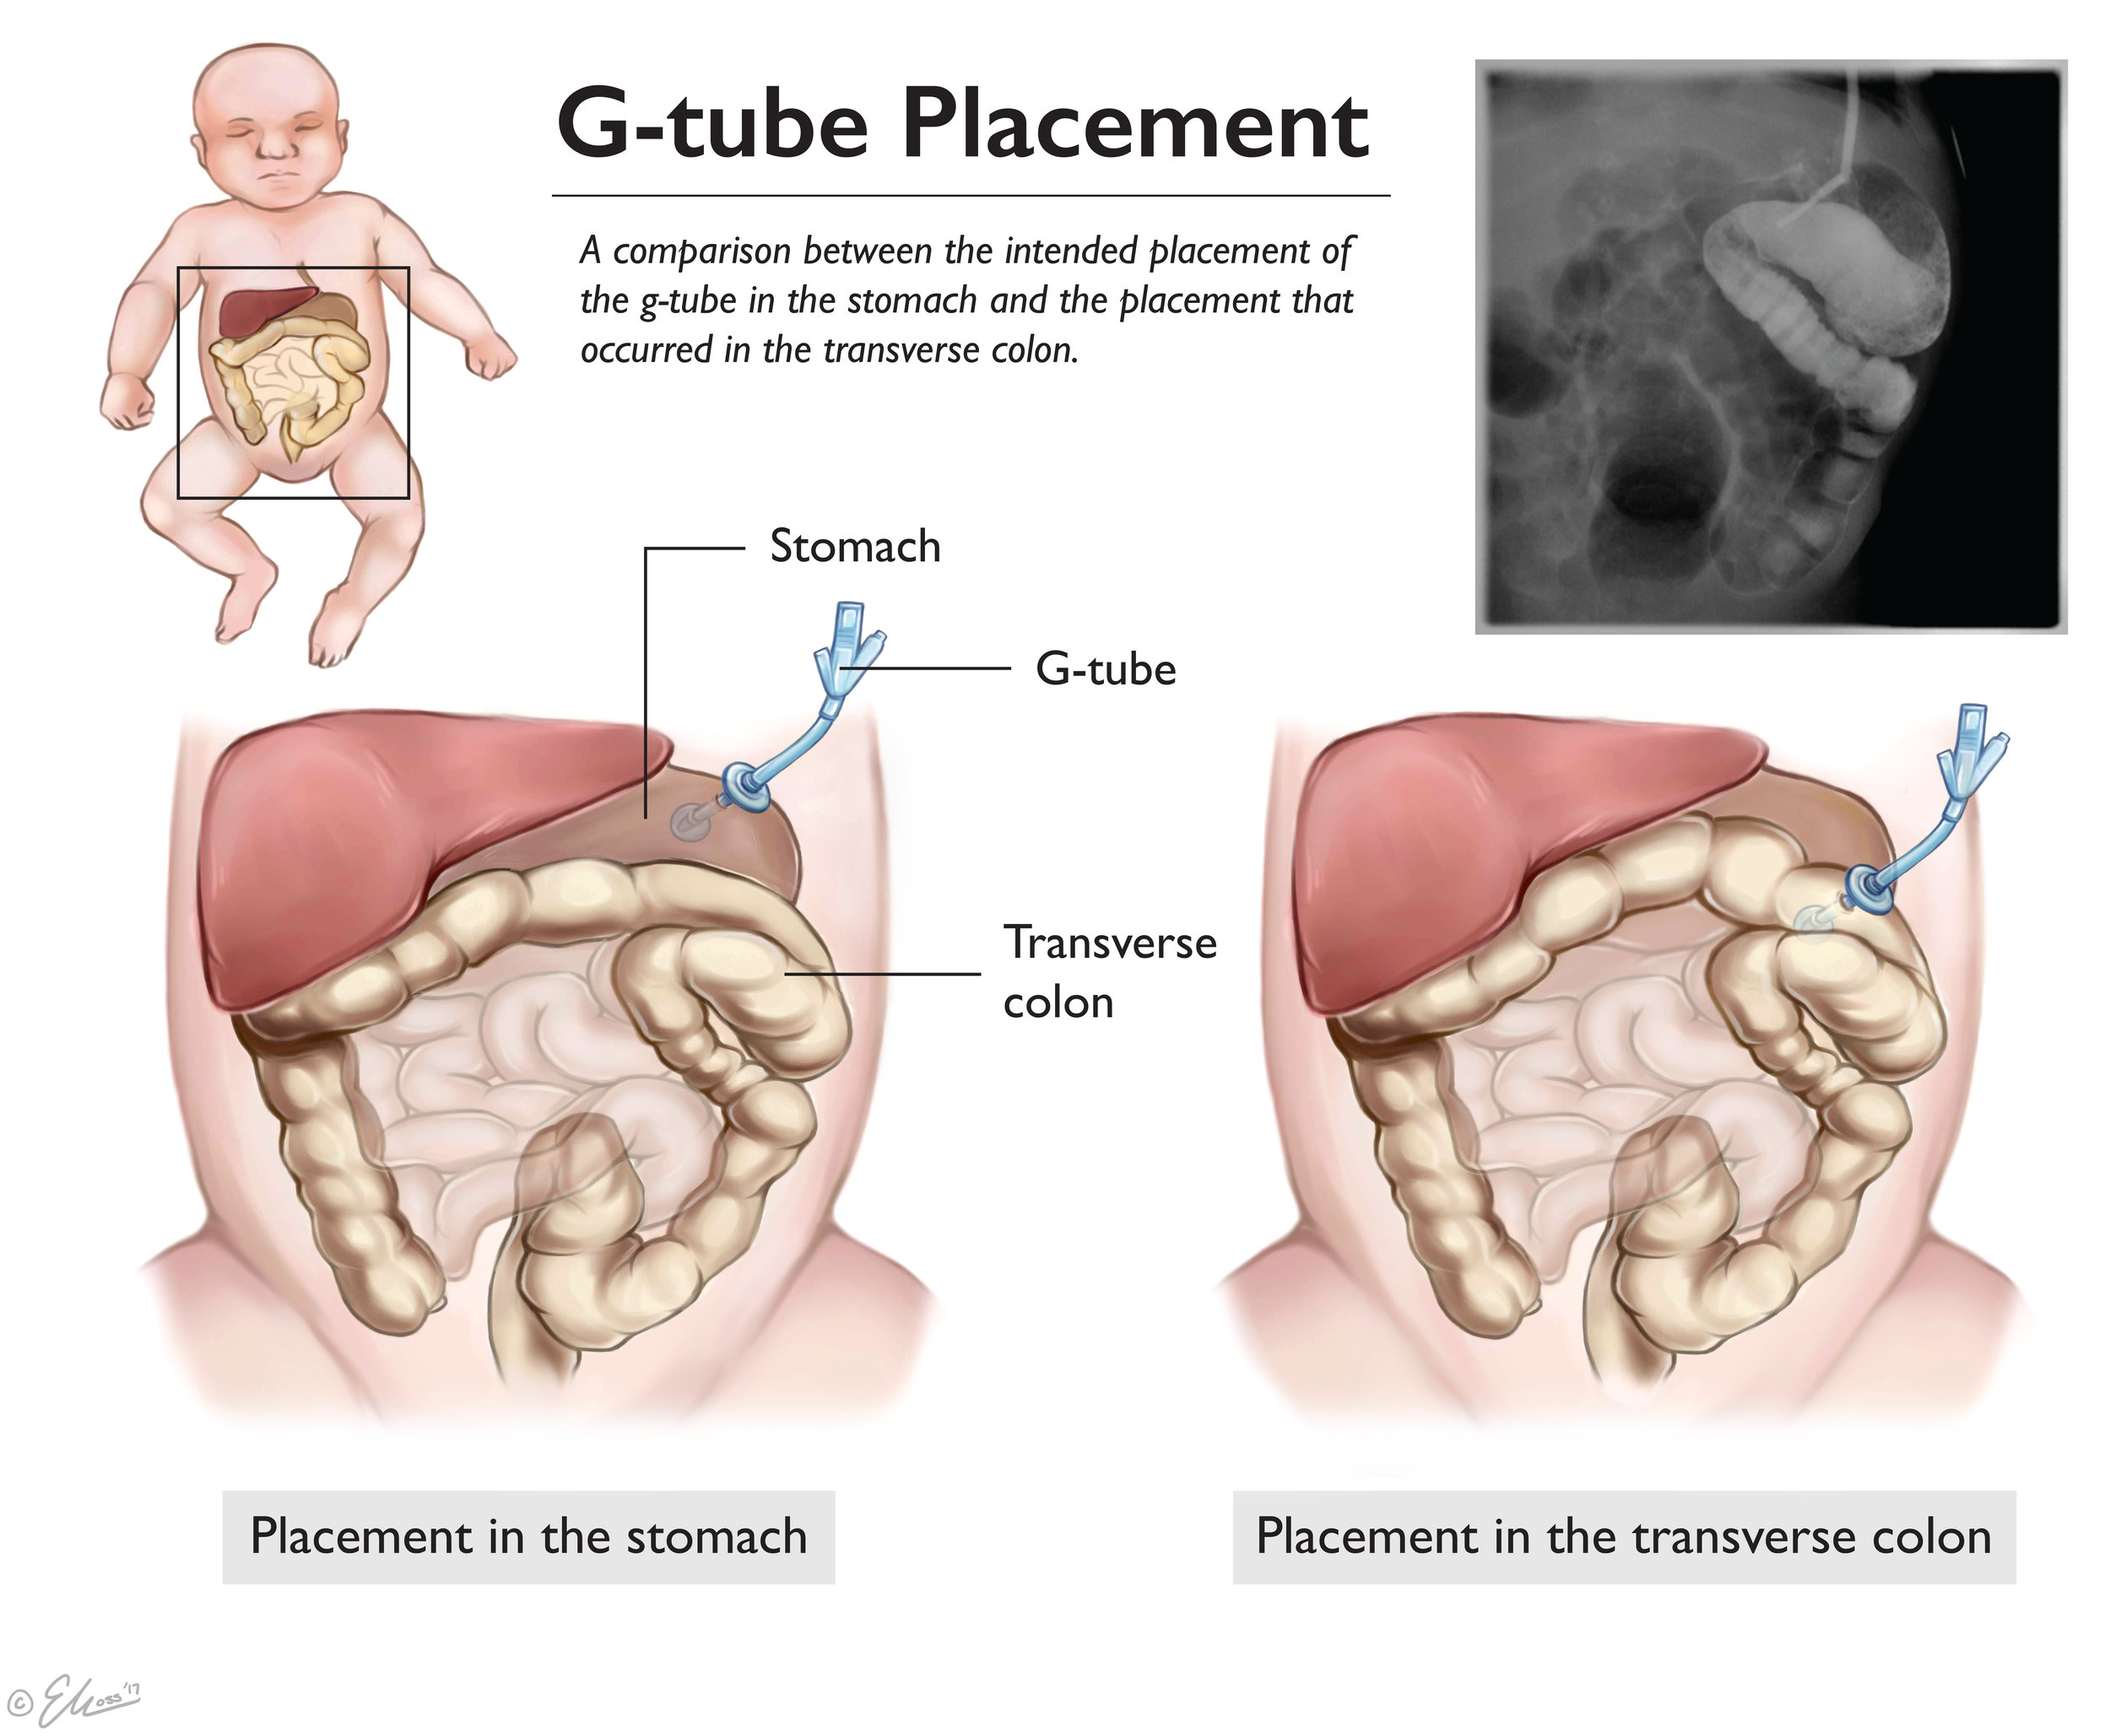 G-tube Placement